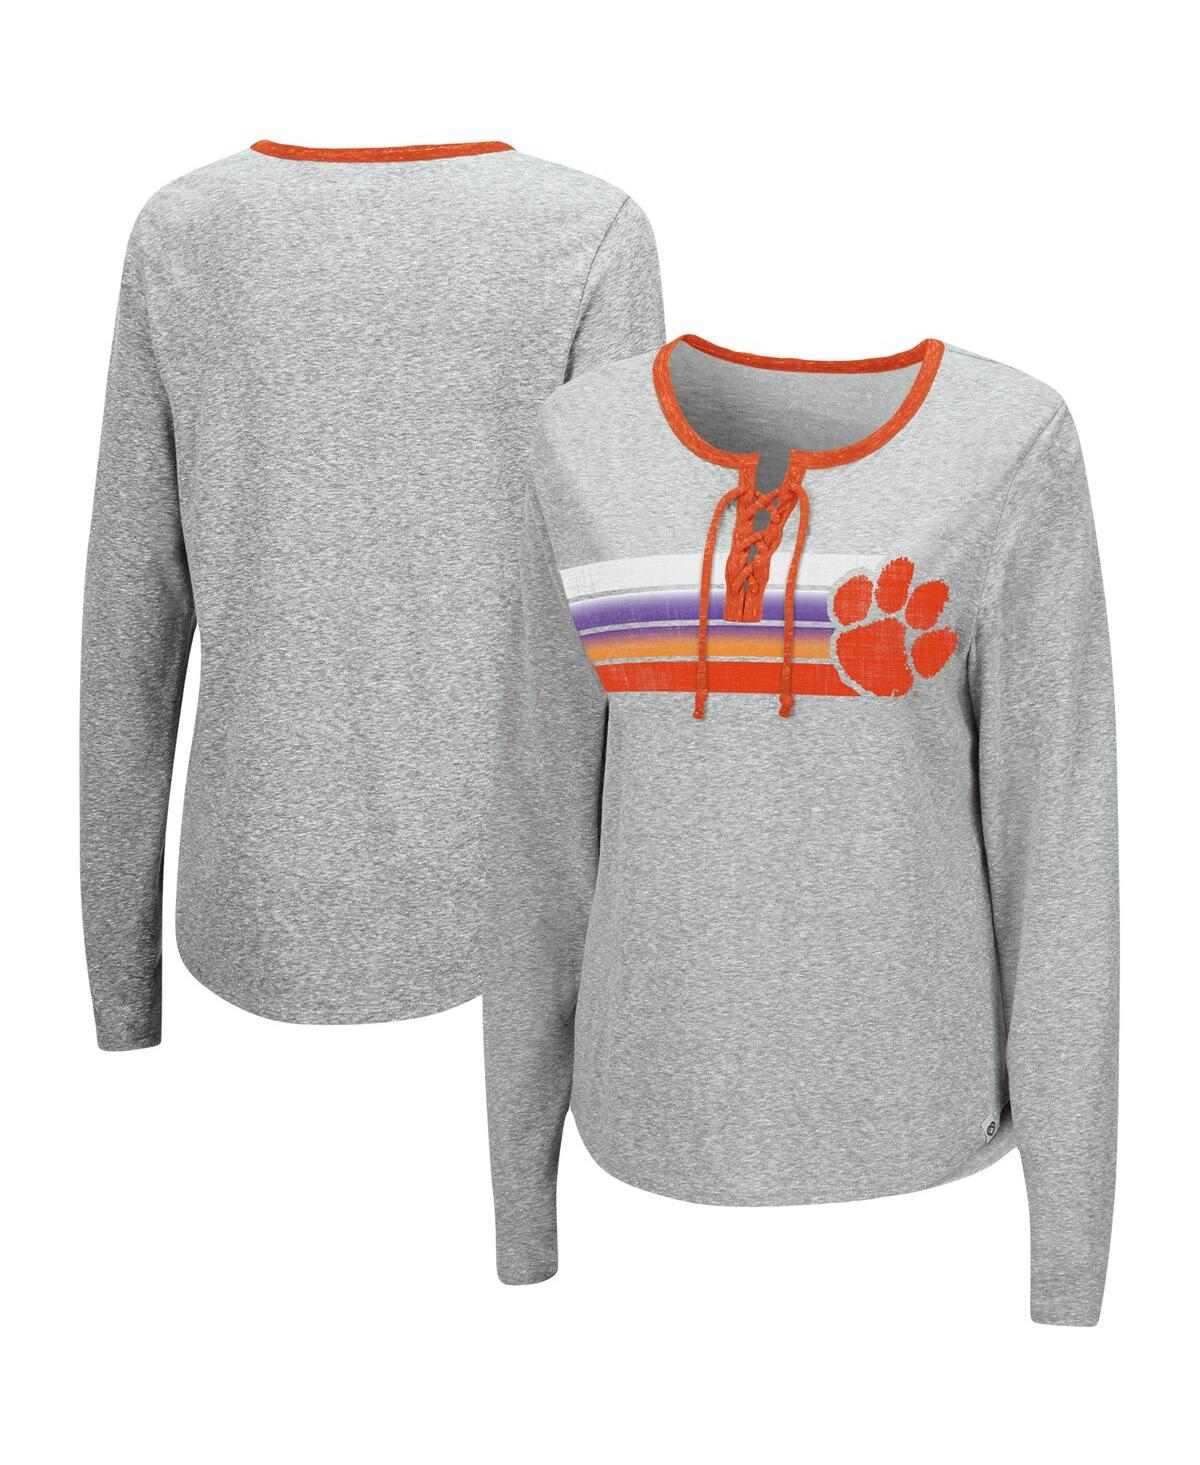 Shop Colosseum Women's  Heathered Gray Clemson Tigers Sundial Tri-blend Long Sleeve Lace-up T-shirt